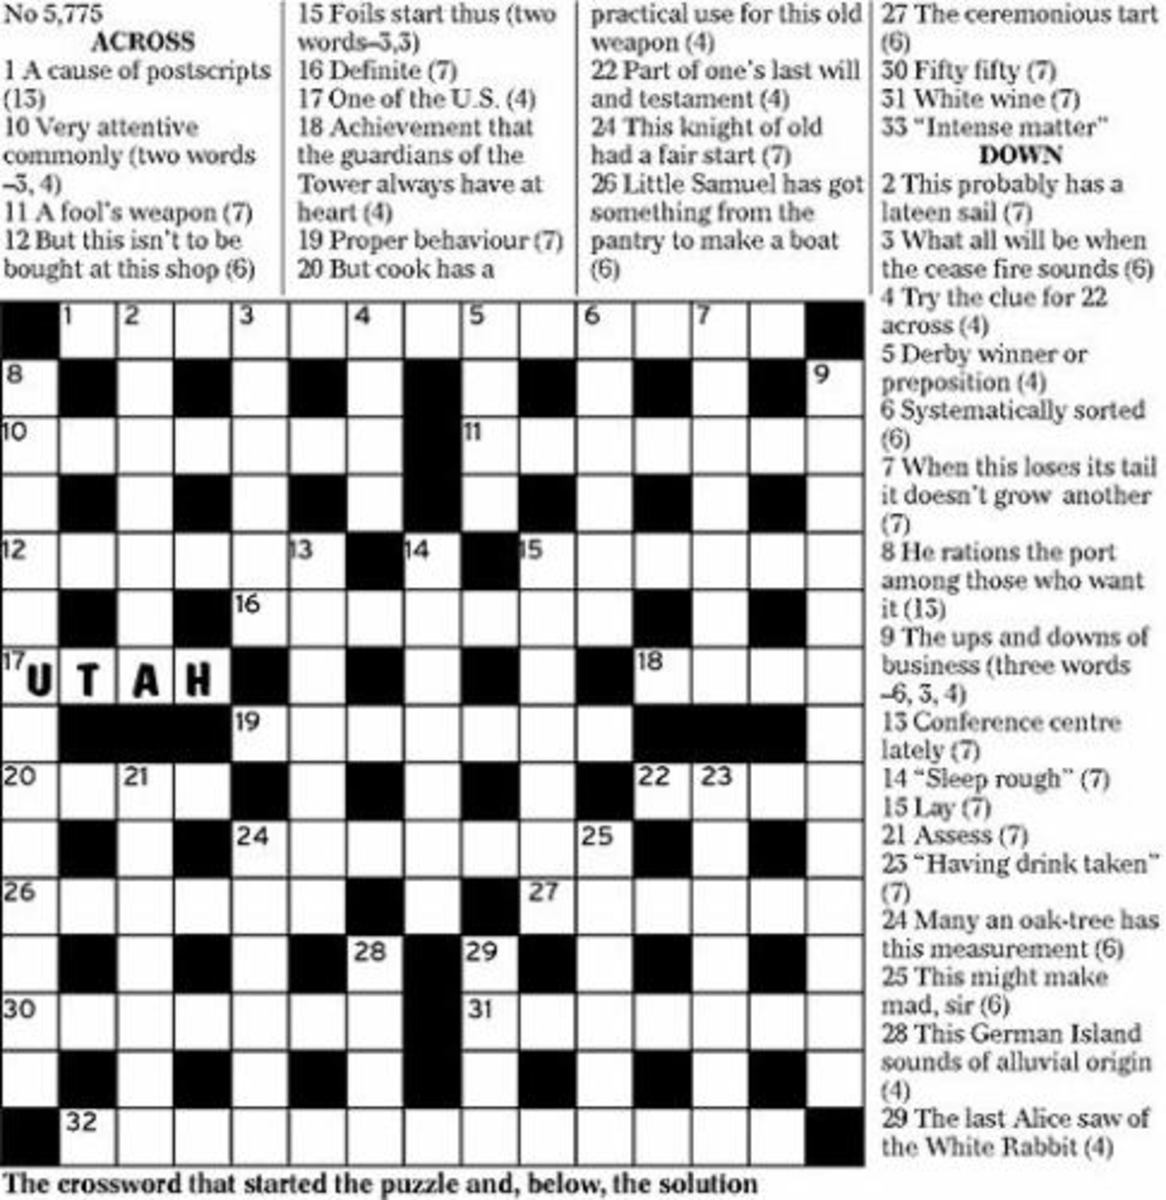 Crossword in the Daily Telegraph of May 2nd 1944 showing the Clue for Utah.